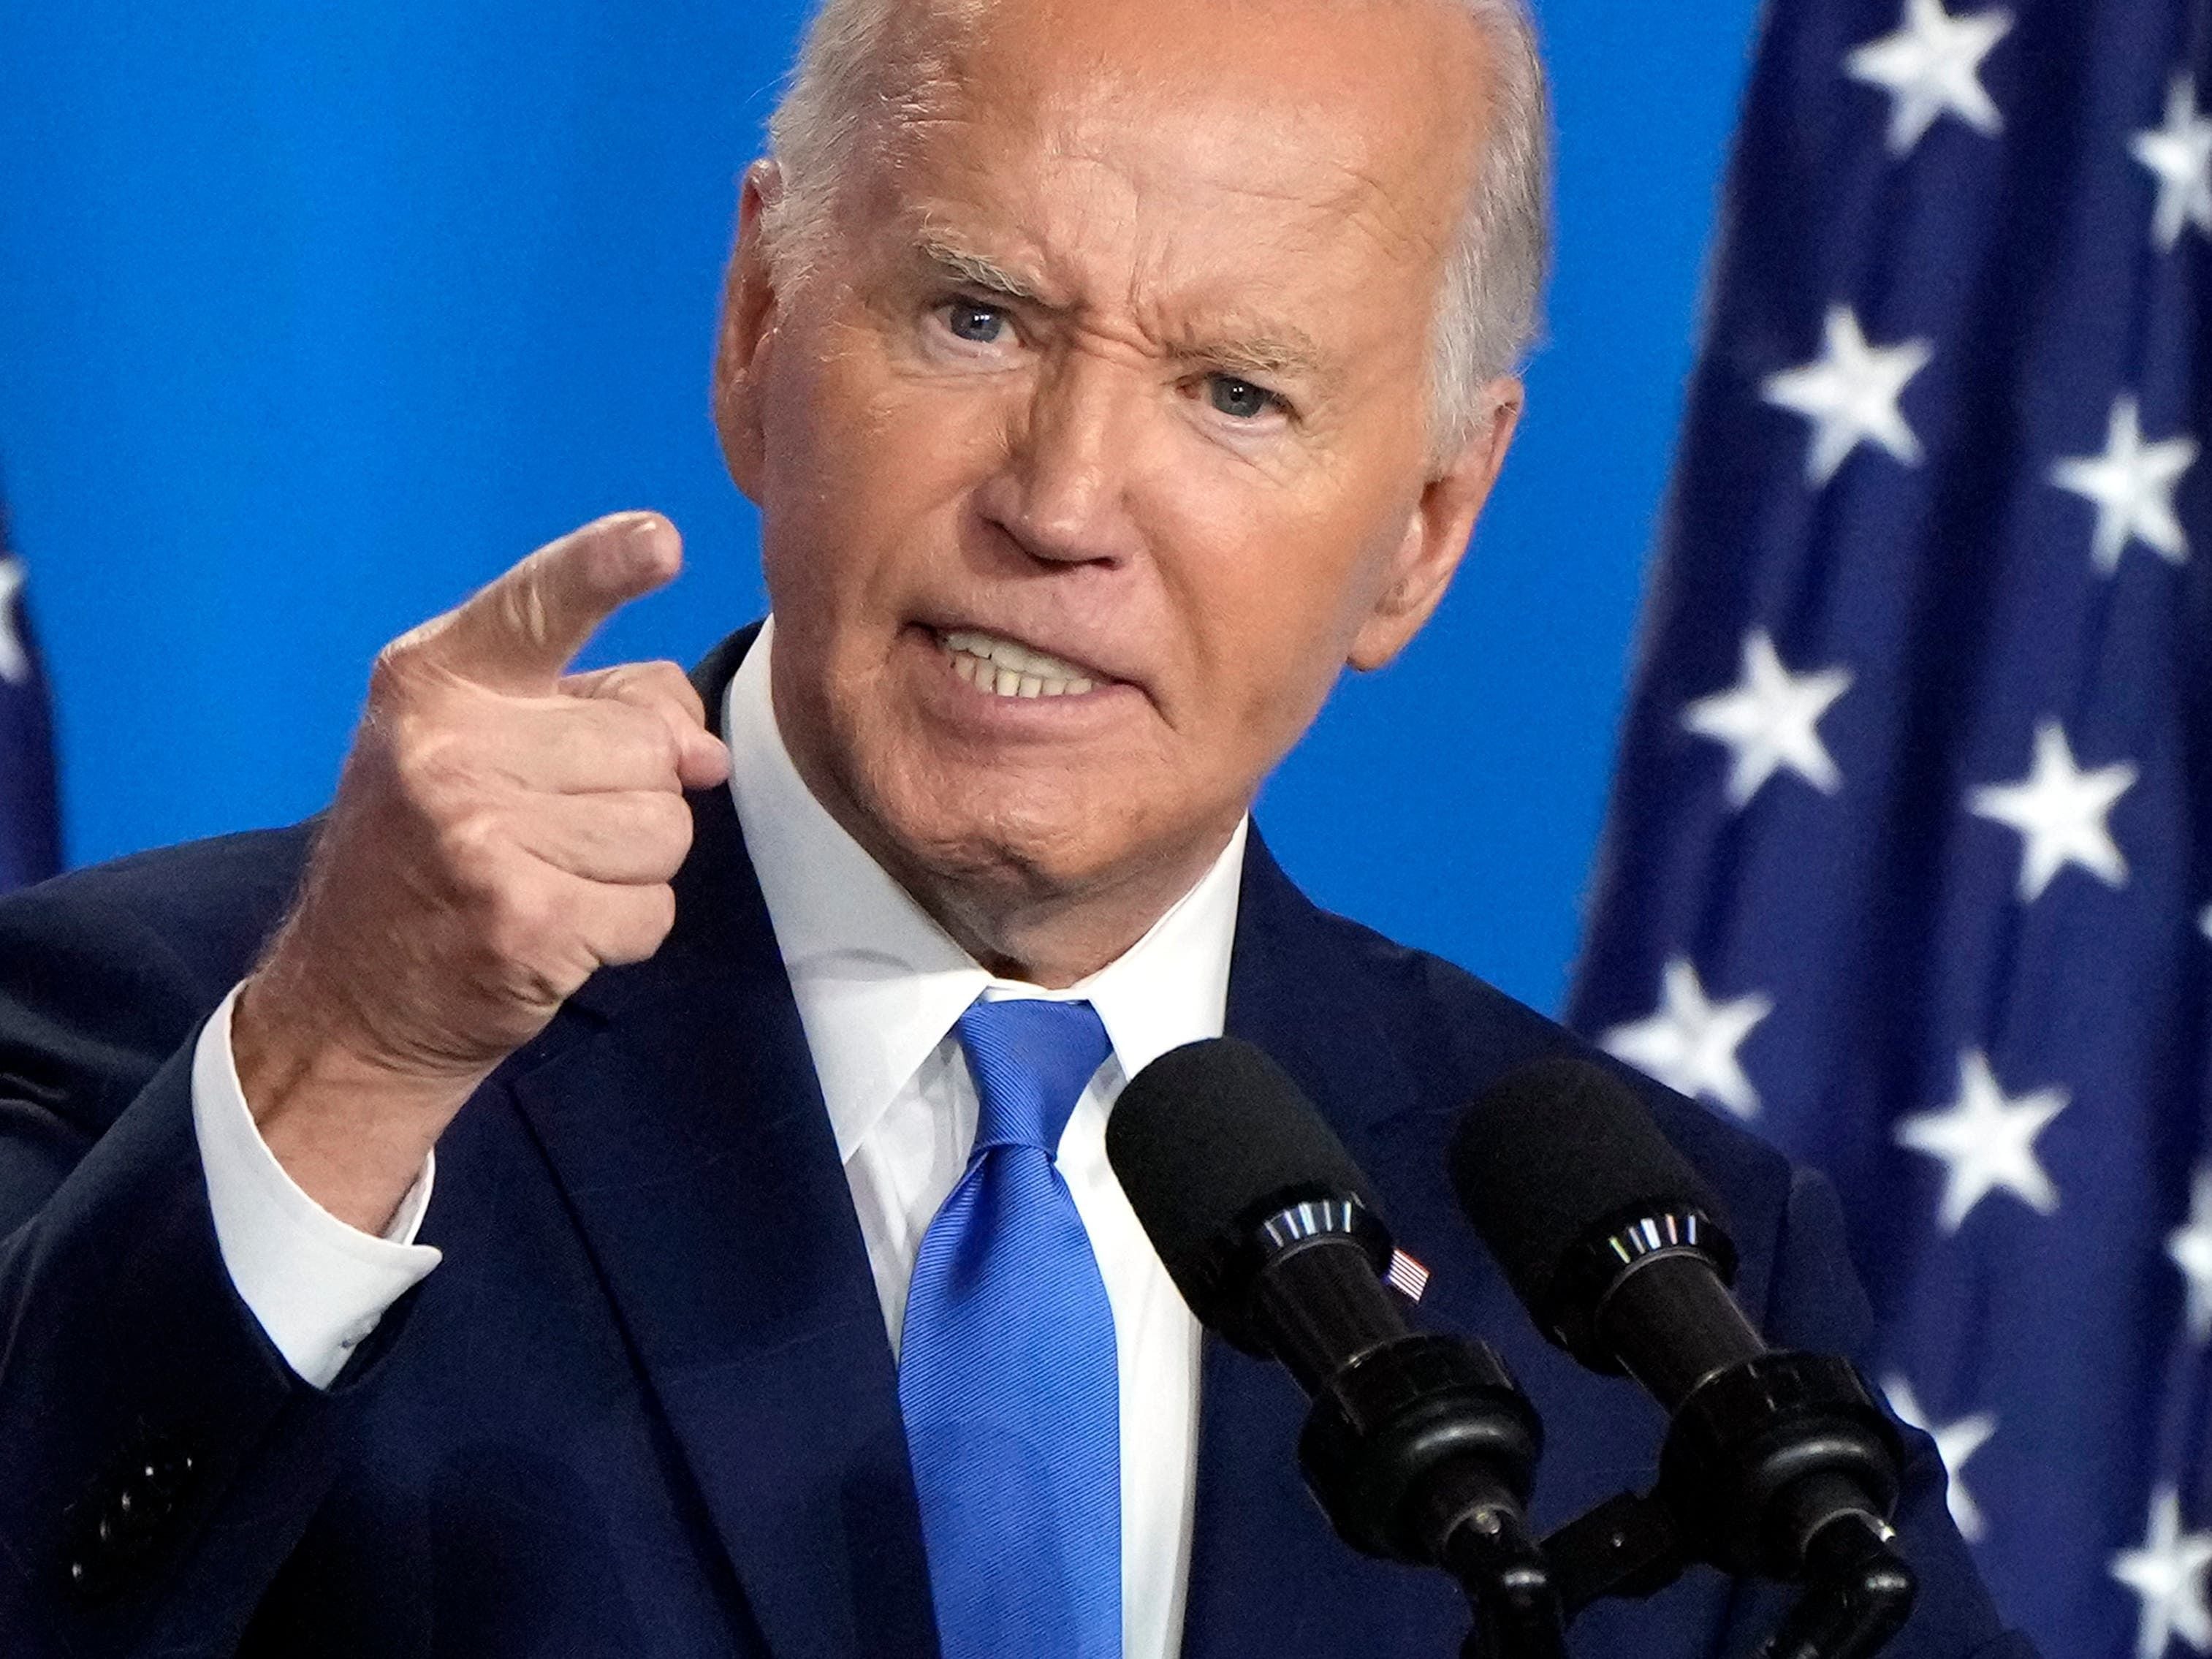 Democrats split over who would be next if Biden quits presidential race